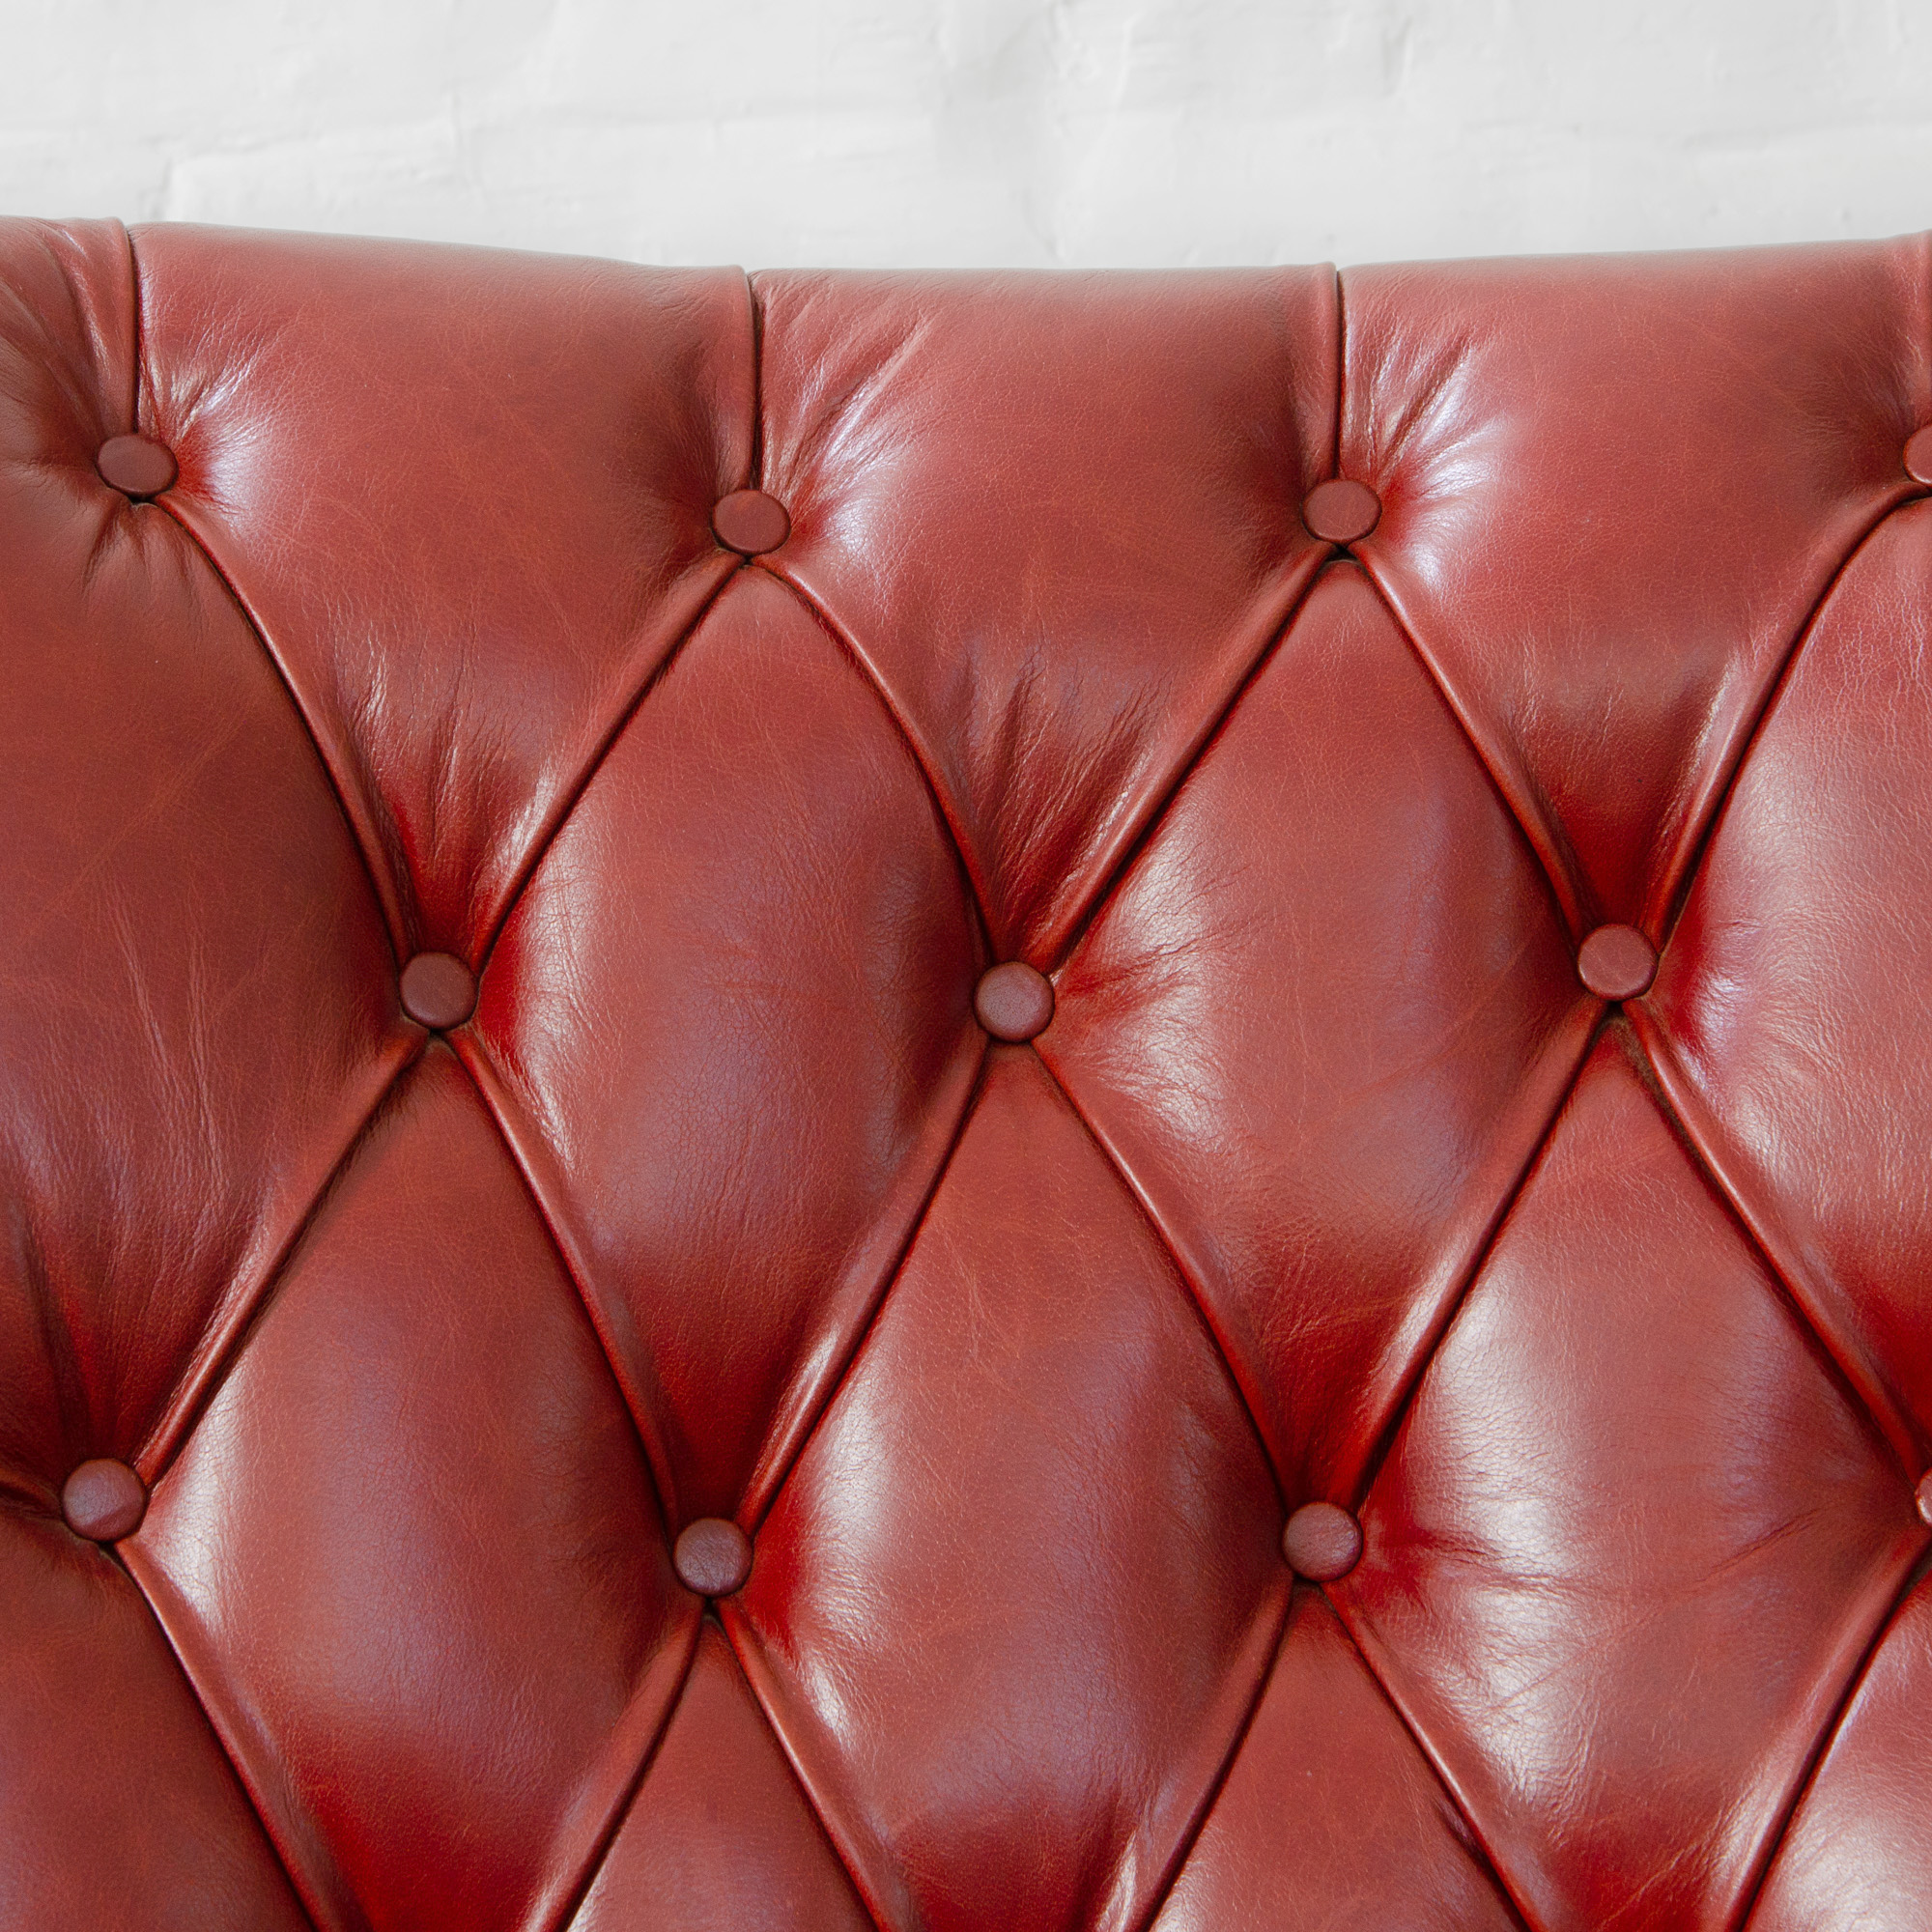 Loveseat Tufted Leather